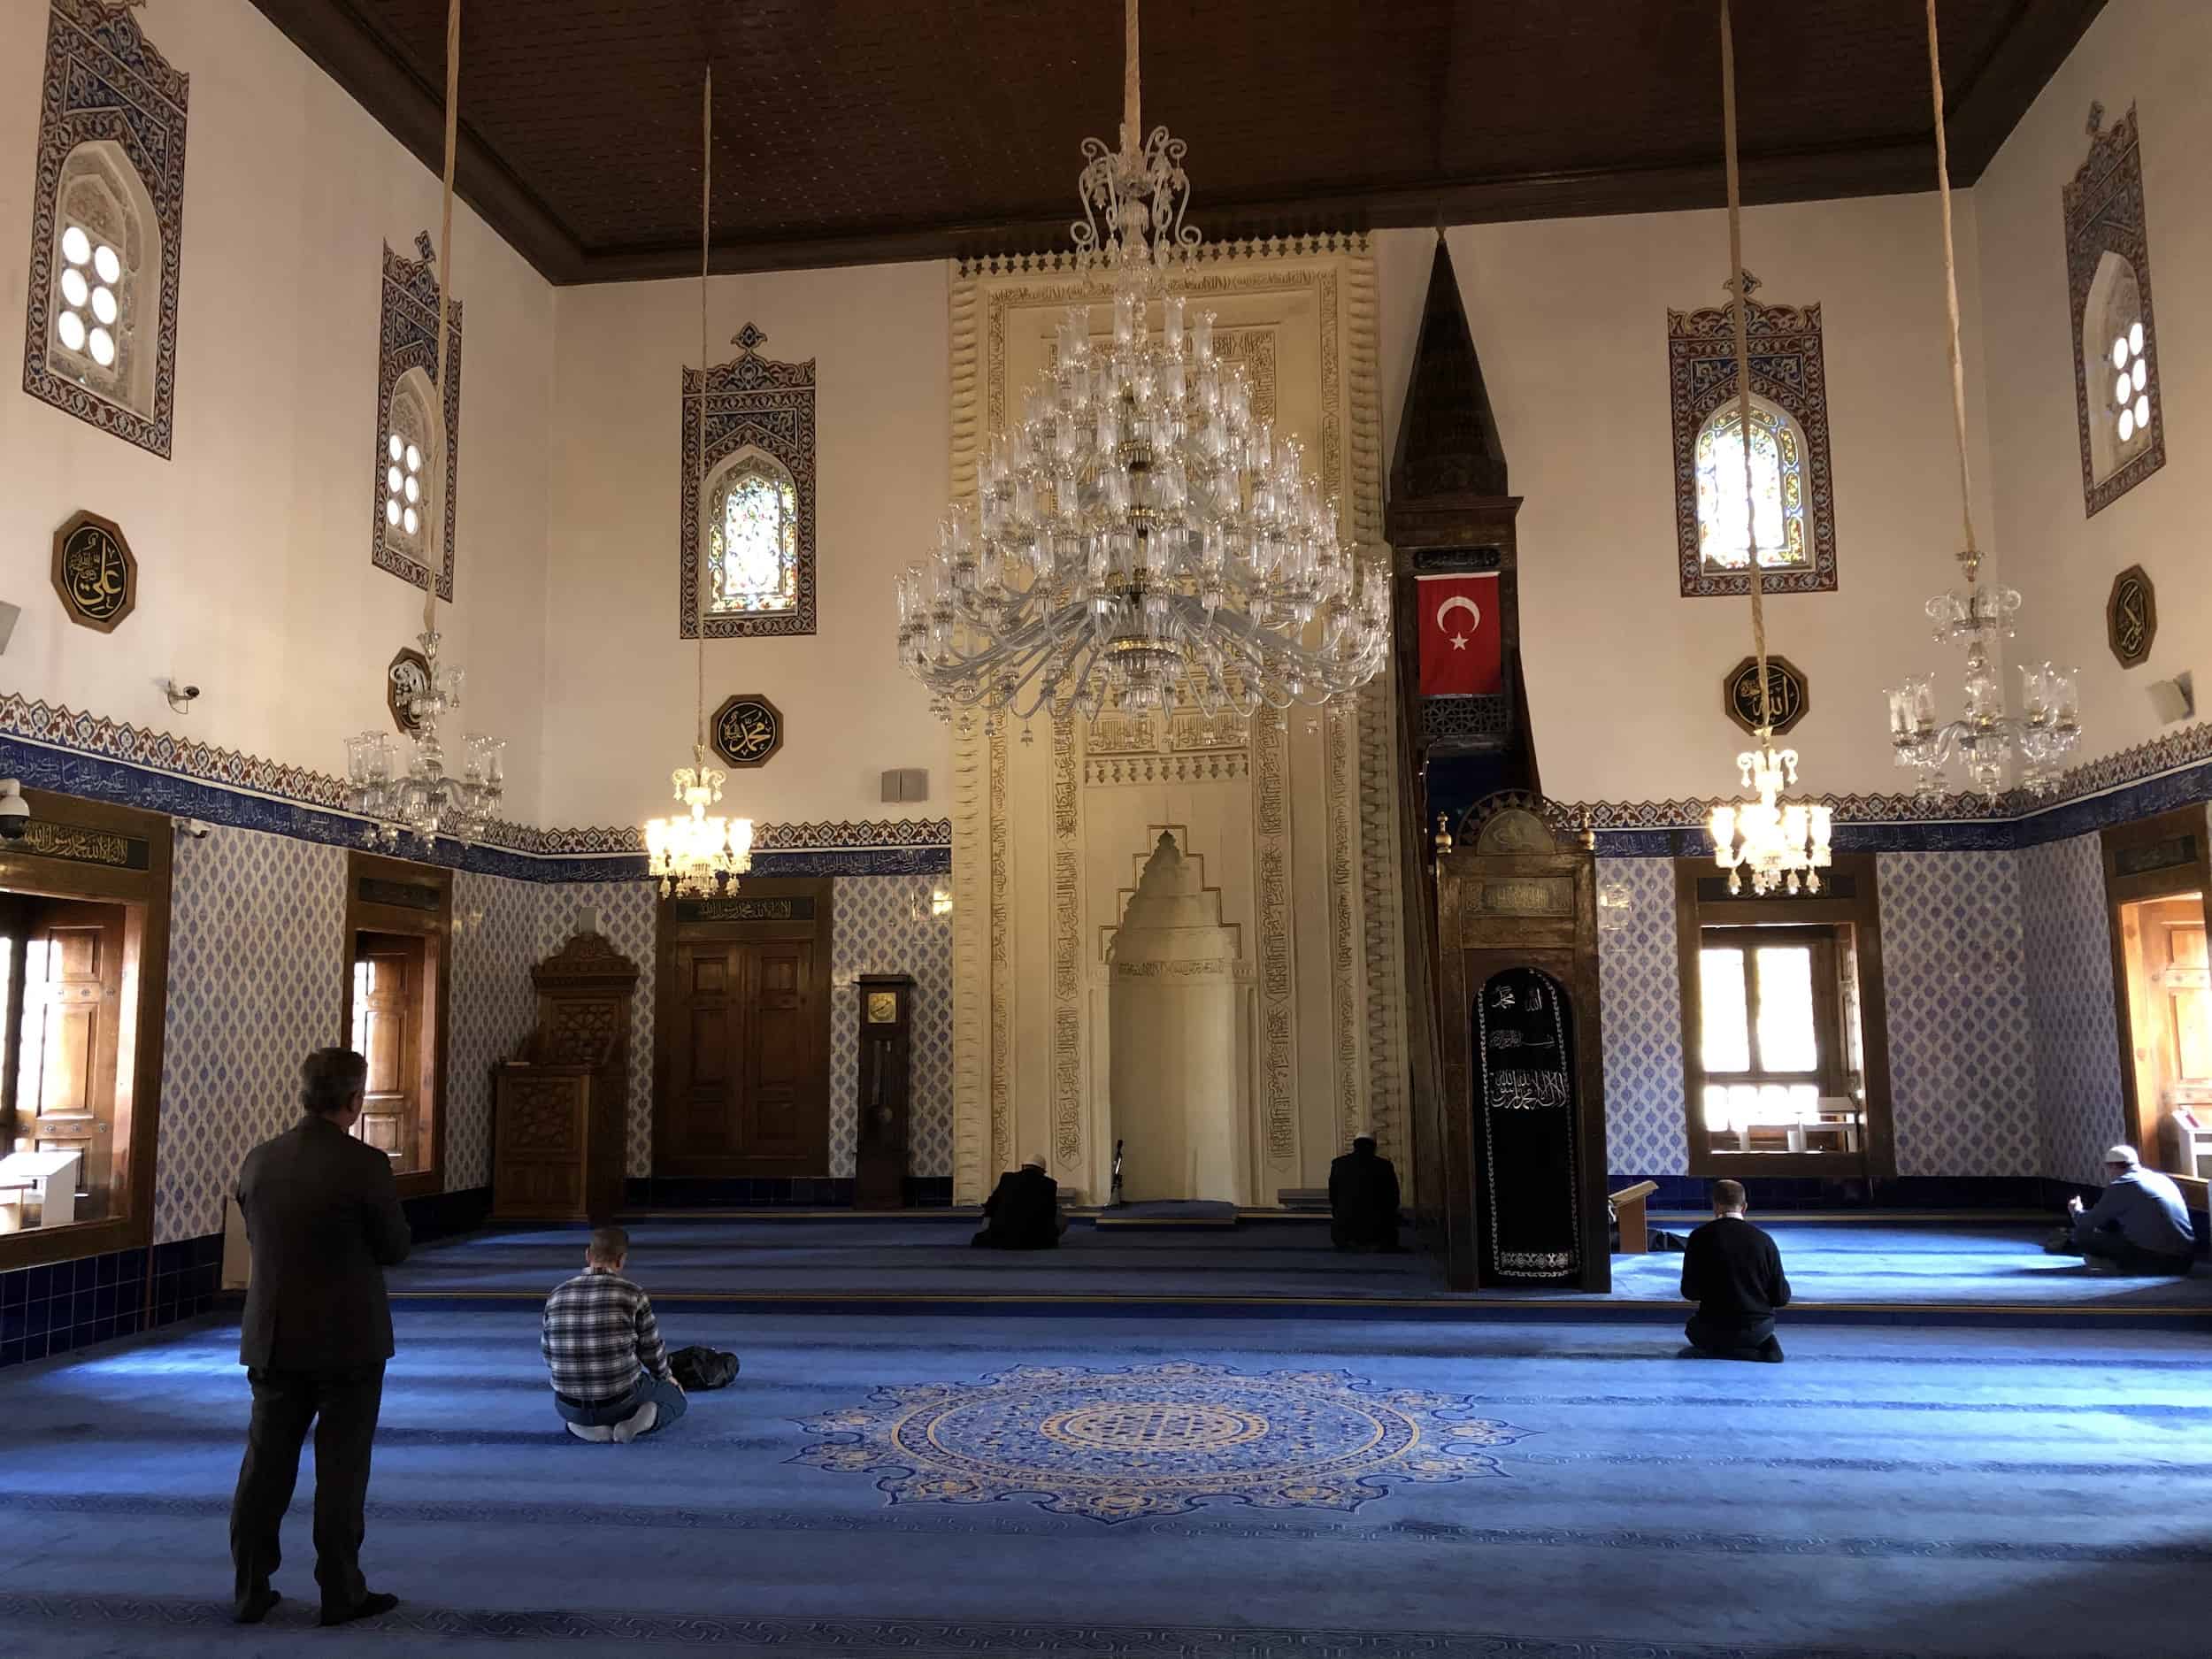 Main section of the prayer hall at the Hacı Bayram Mosque in Ulus, Ankara, Turkey